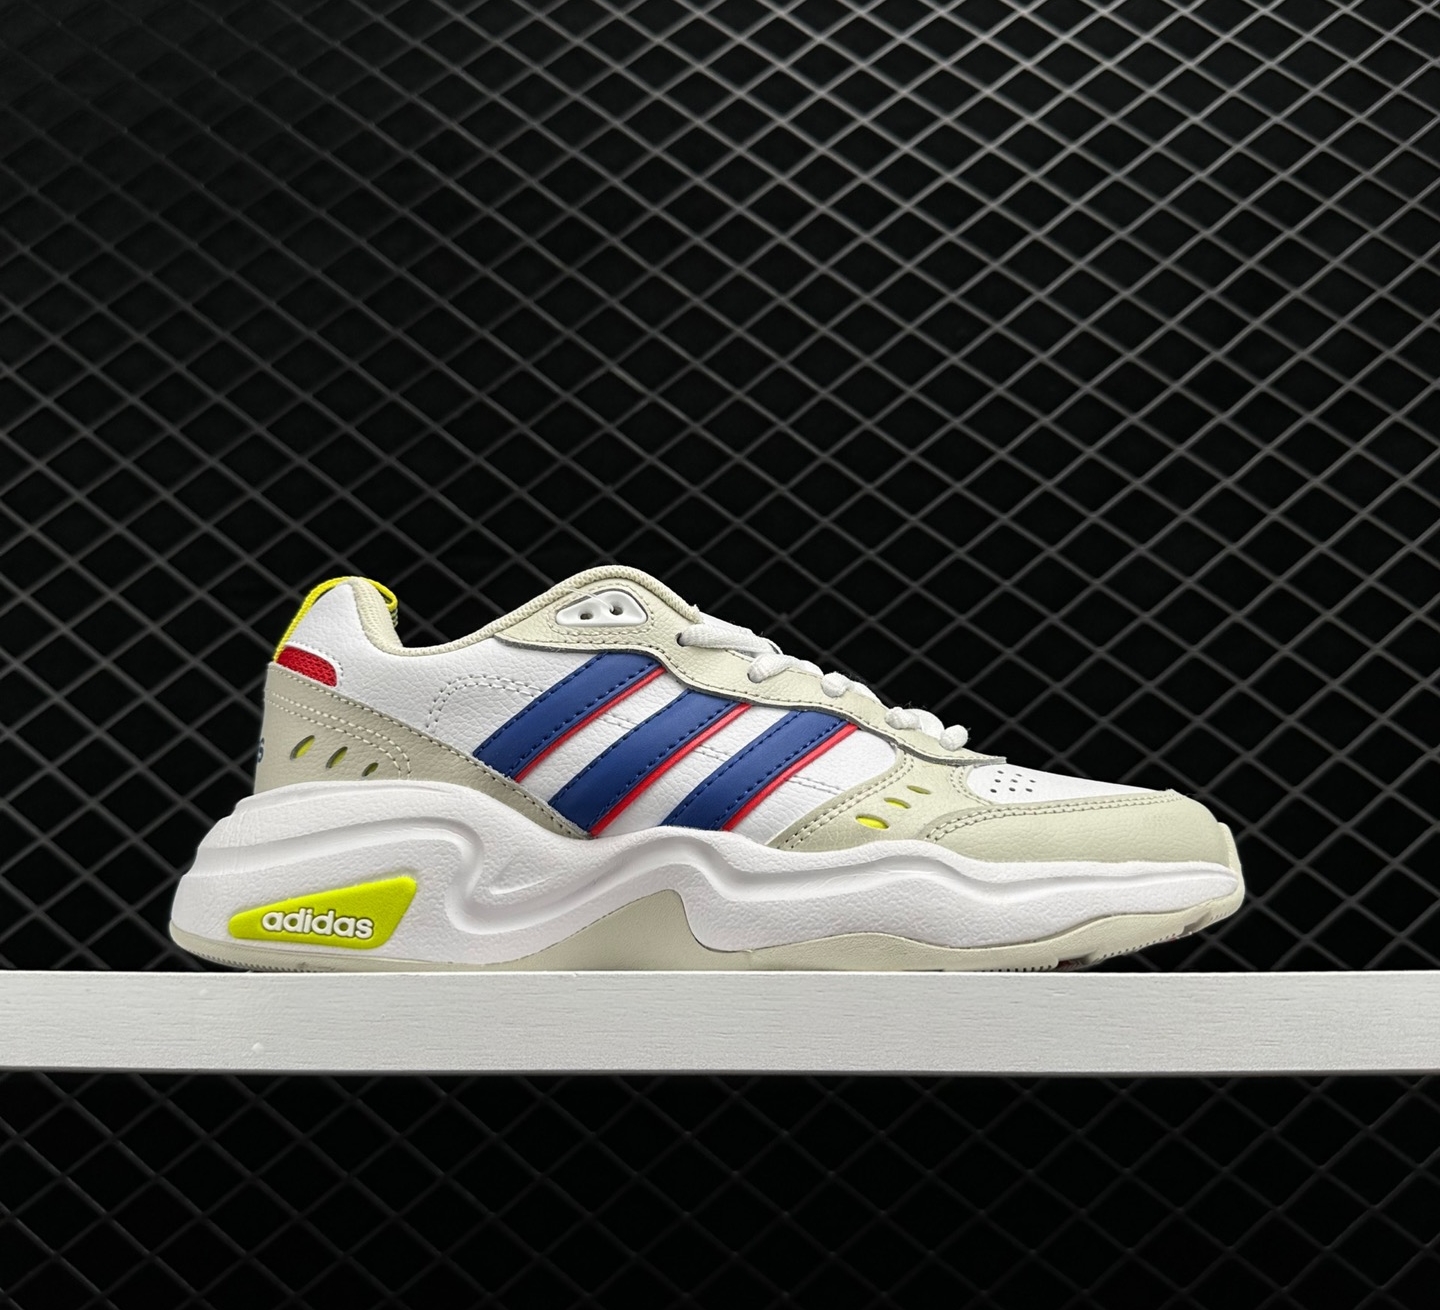 Adidas Neo Strutter 'White Cream Blue' GX6157 Sneakers - Trendy and Stylish Footwear